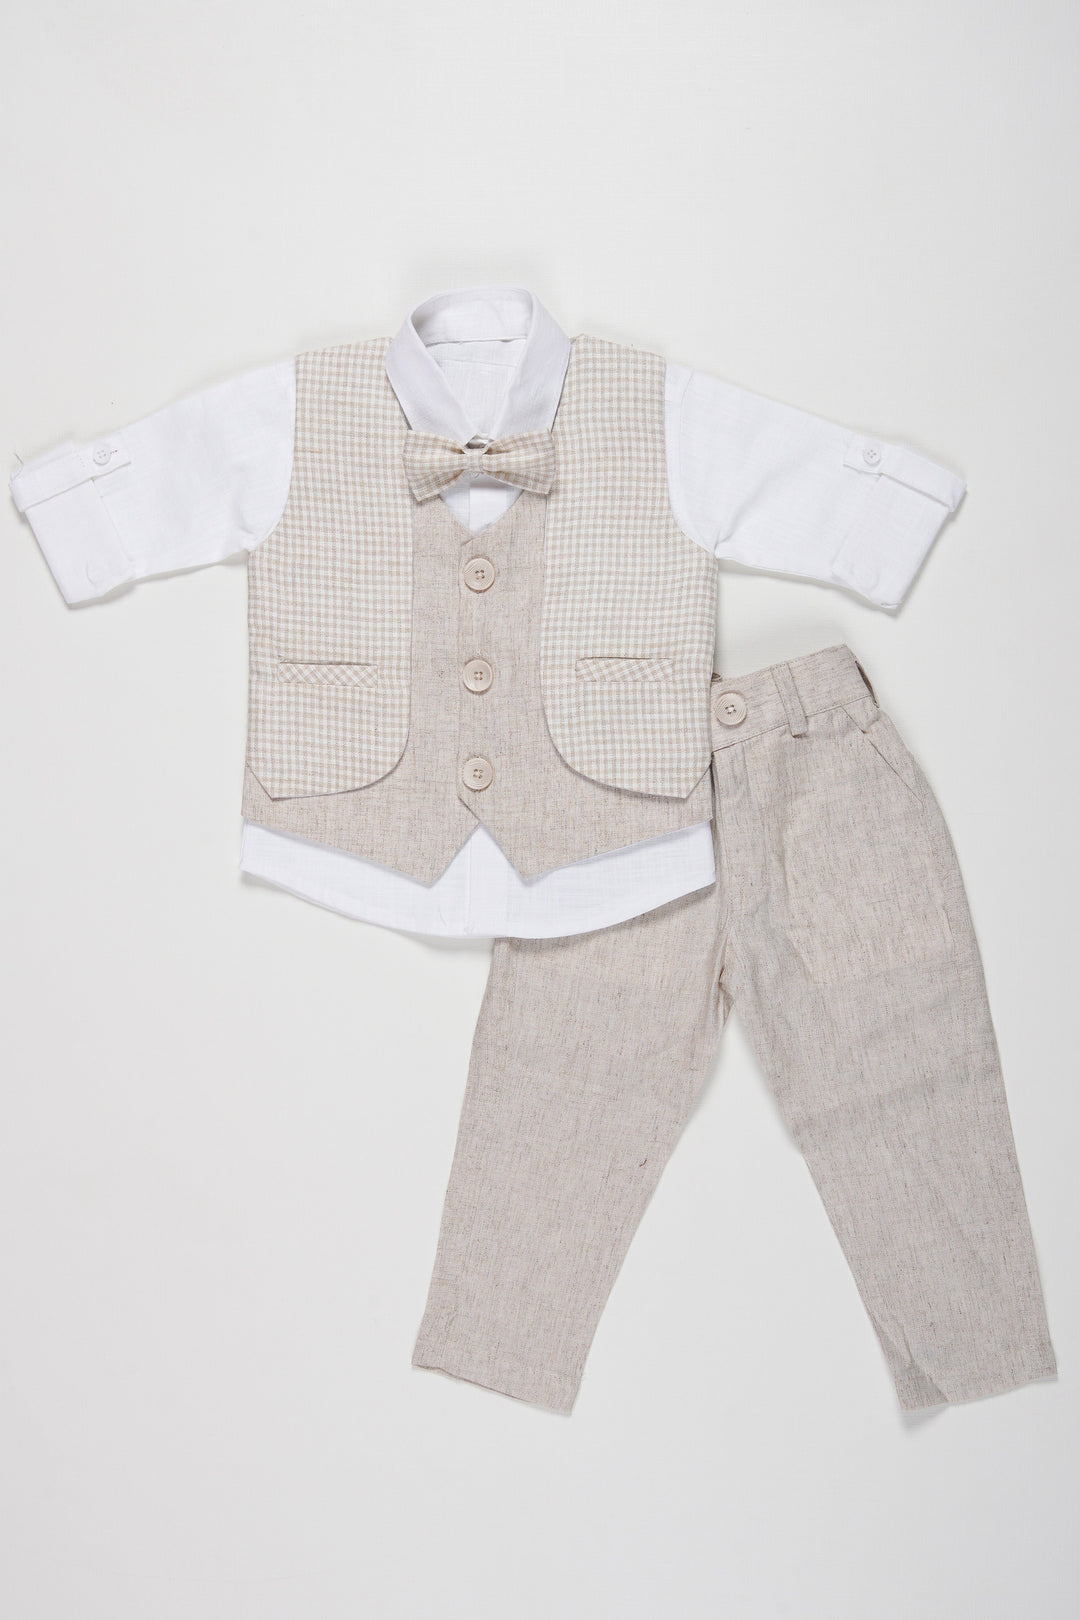 The Nesavu Boys Casual Set Boys Modern Linen Vest Suit Set with Matching Trousers and Bow Tie Nesavu 12 (3M) / Beige / Cotton Linen BCS031A-12 Boys Linen Vest and Trousers Set | Elegant Formal Wear for Boys with Bow Tie | The Nesavu